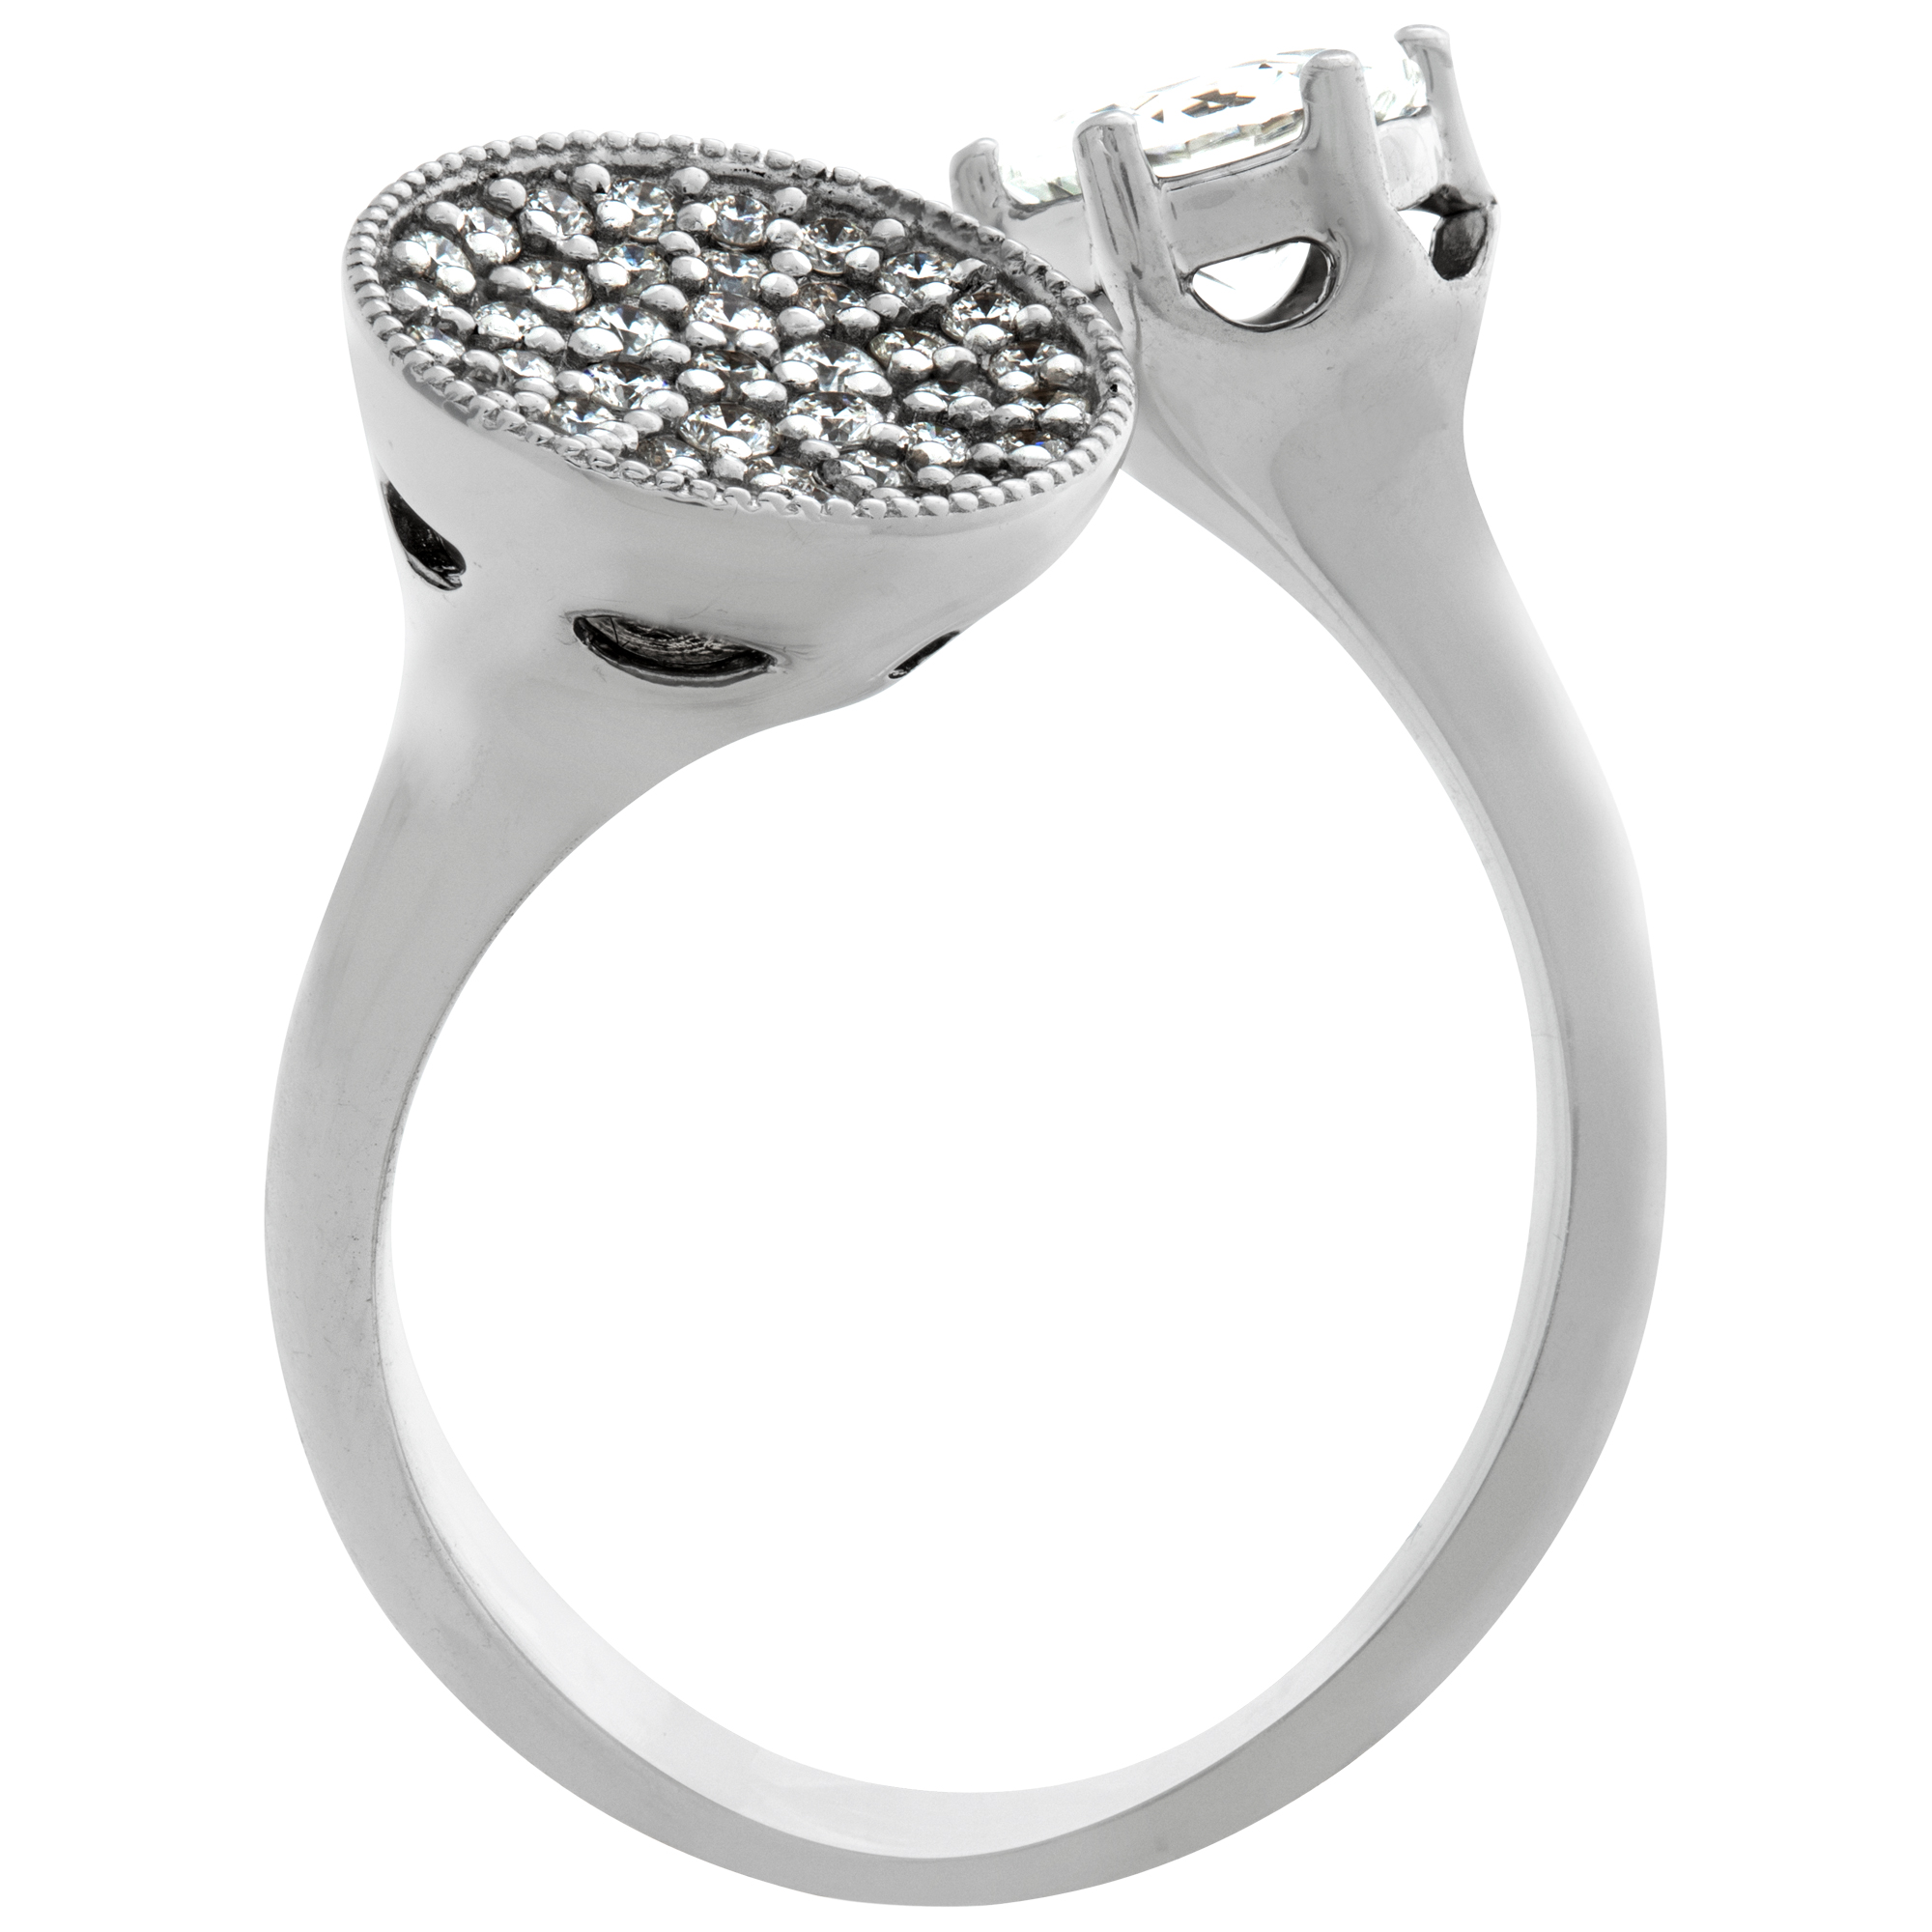 Pave Diamond and white sapphire ring set in 18k white gold. Size 5.75 image 4